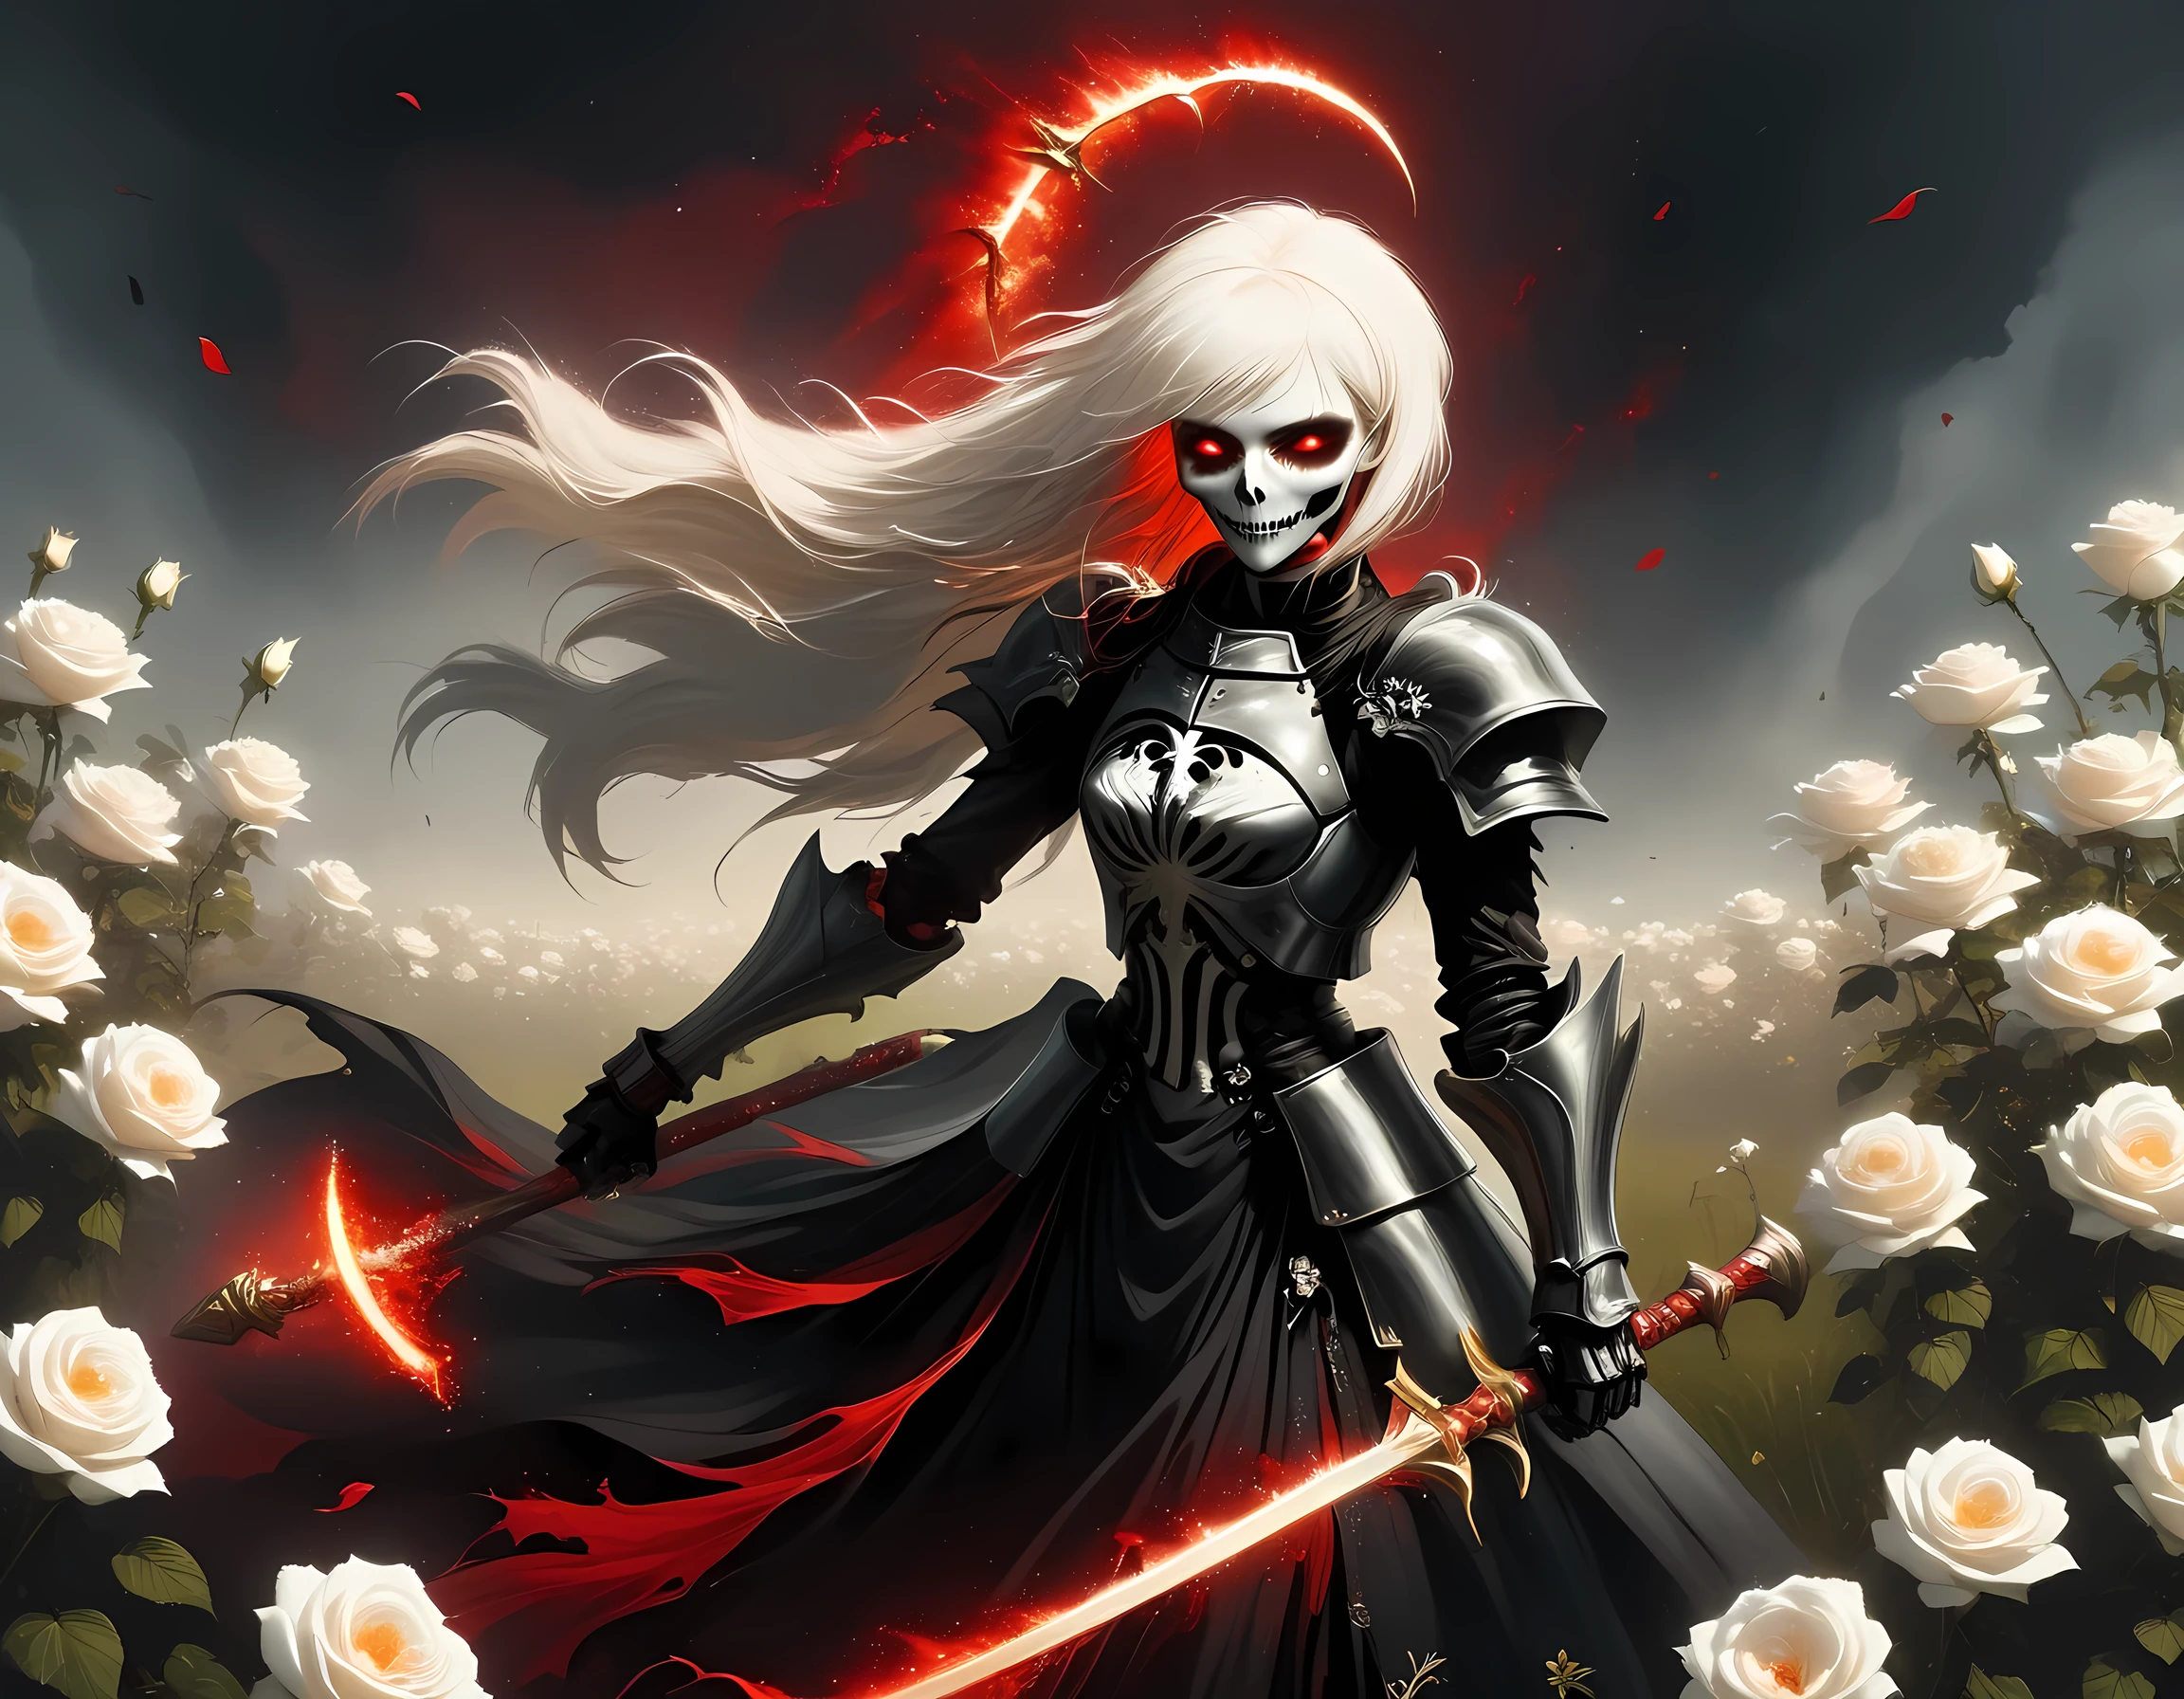 dark fantasy art, a female skeletal grim reaper in a field of white roses, the reaper has (skeletal head: 1.3) , long (white: 1.2) hair , red glowing eyes, she wears black robes, and black armor dress, ArmoredDress, flowing robes, she holds a scythe, in her arms, the scythe is dripping blood, a field of (white roses 1.4)  background, dynamic range, ultra wide shot, photorealism, depth of field, hyper realistic, RagingNebula